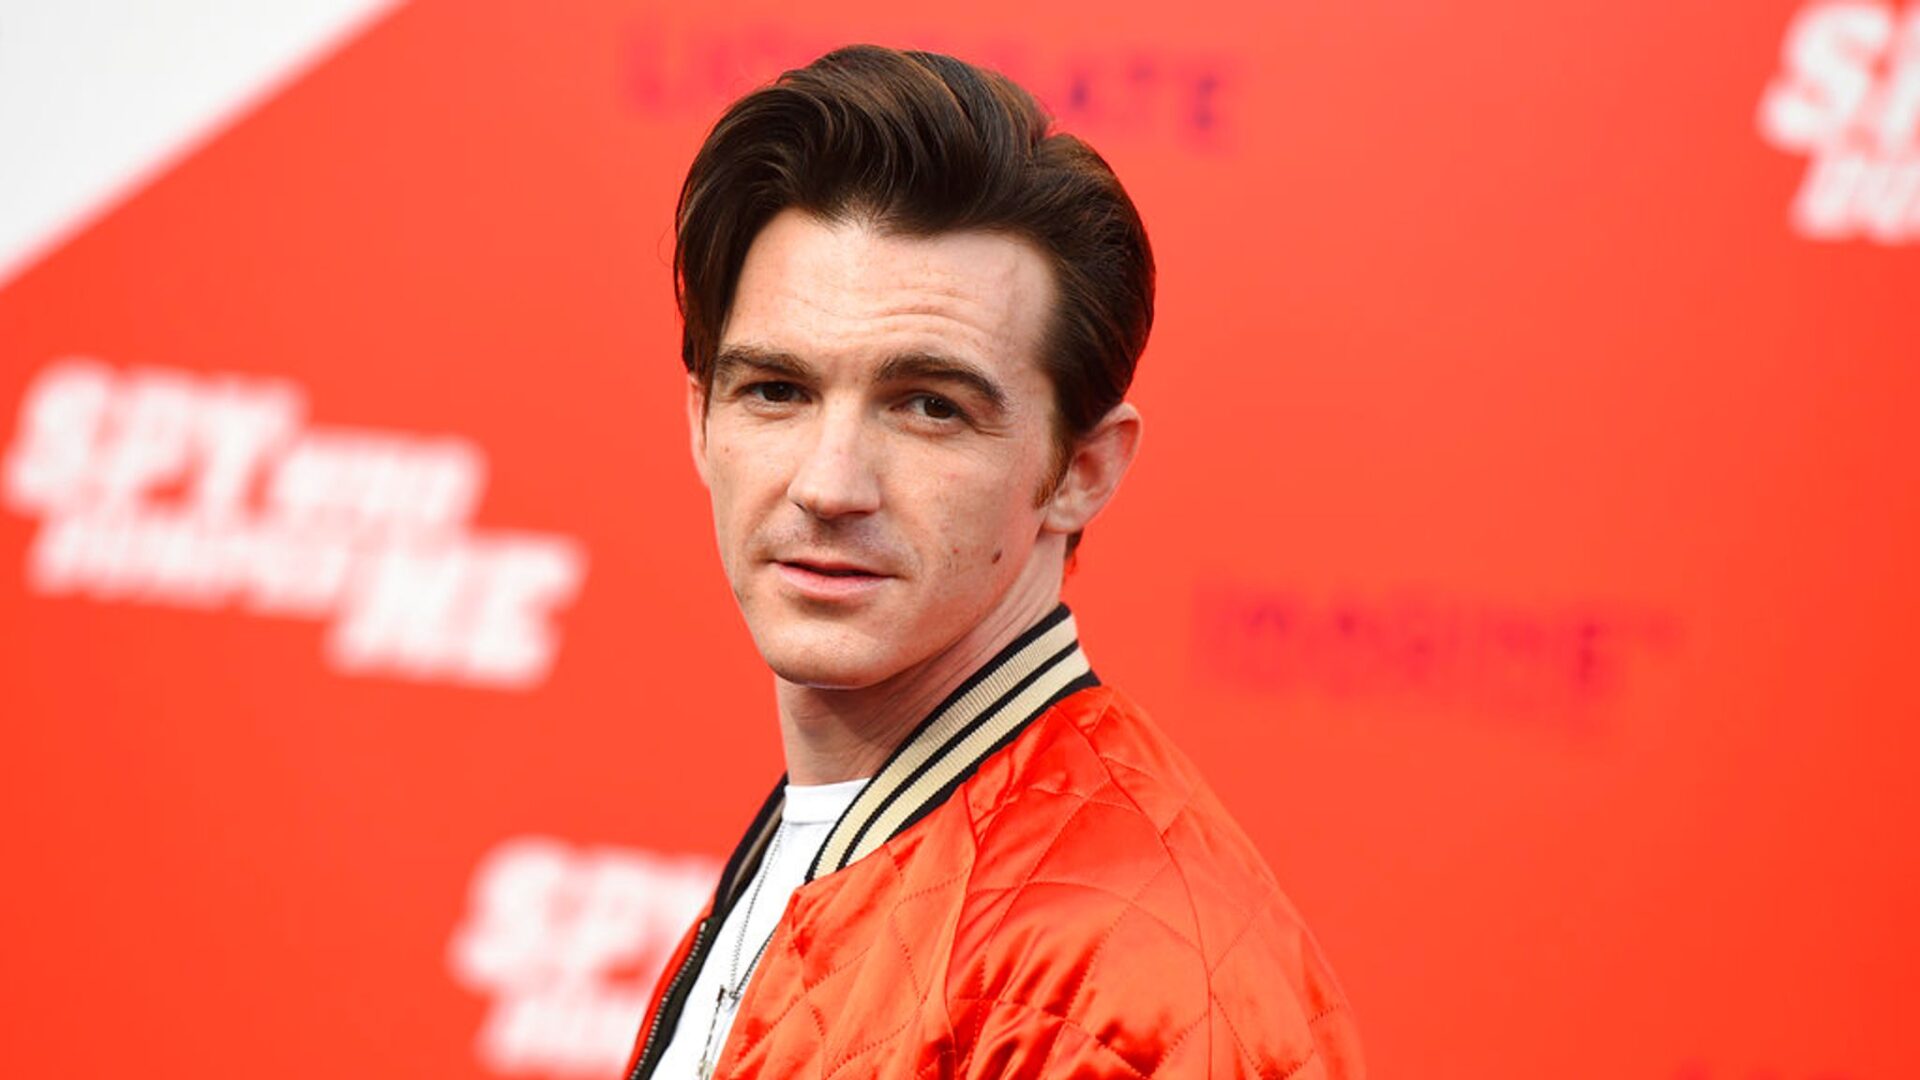 Drake Bell Biography: Age, Net Worth, Songs, YouTube, Girlfriend, Wife, Height, Spouse